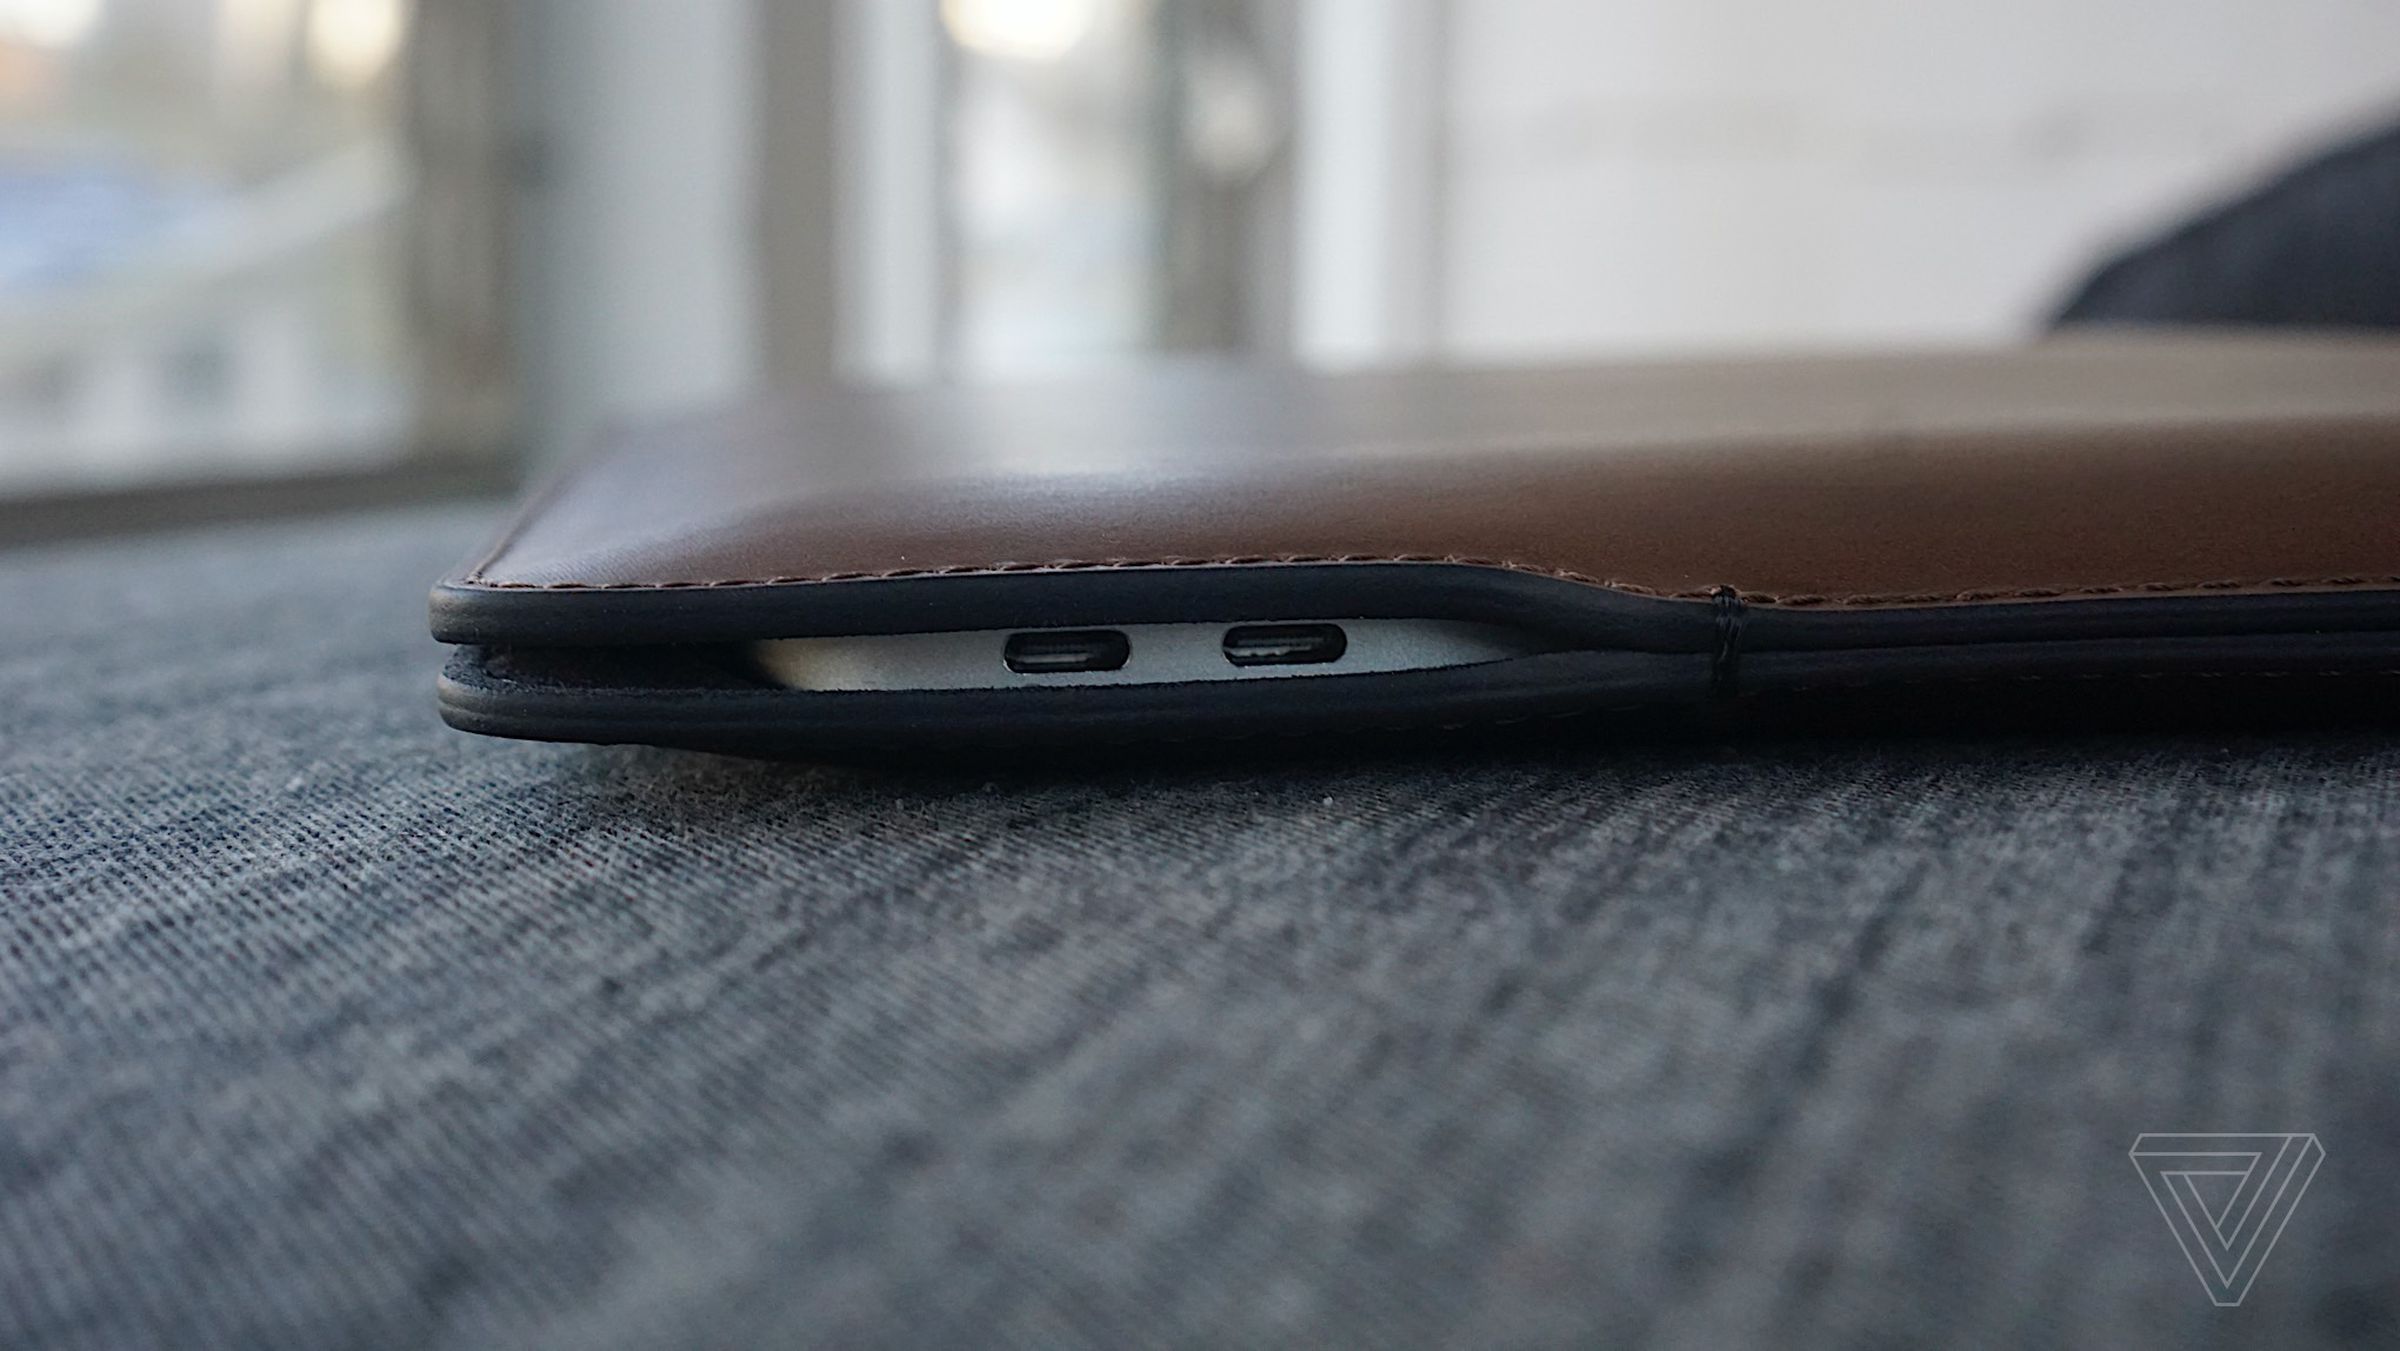 The USB-C charging cutout on the side of the Nomad MacBook Sleeve.